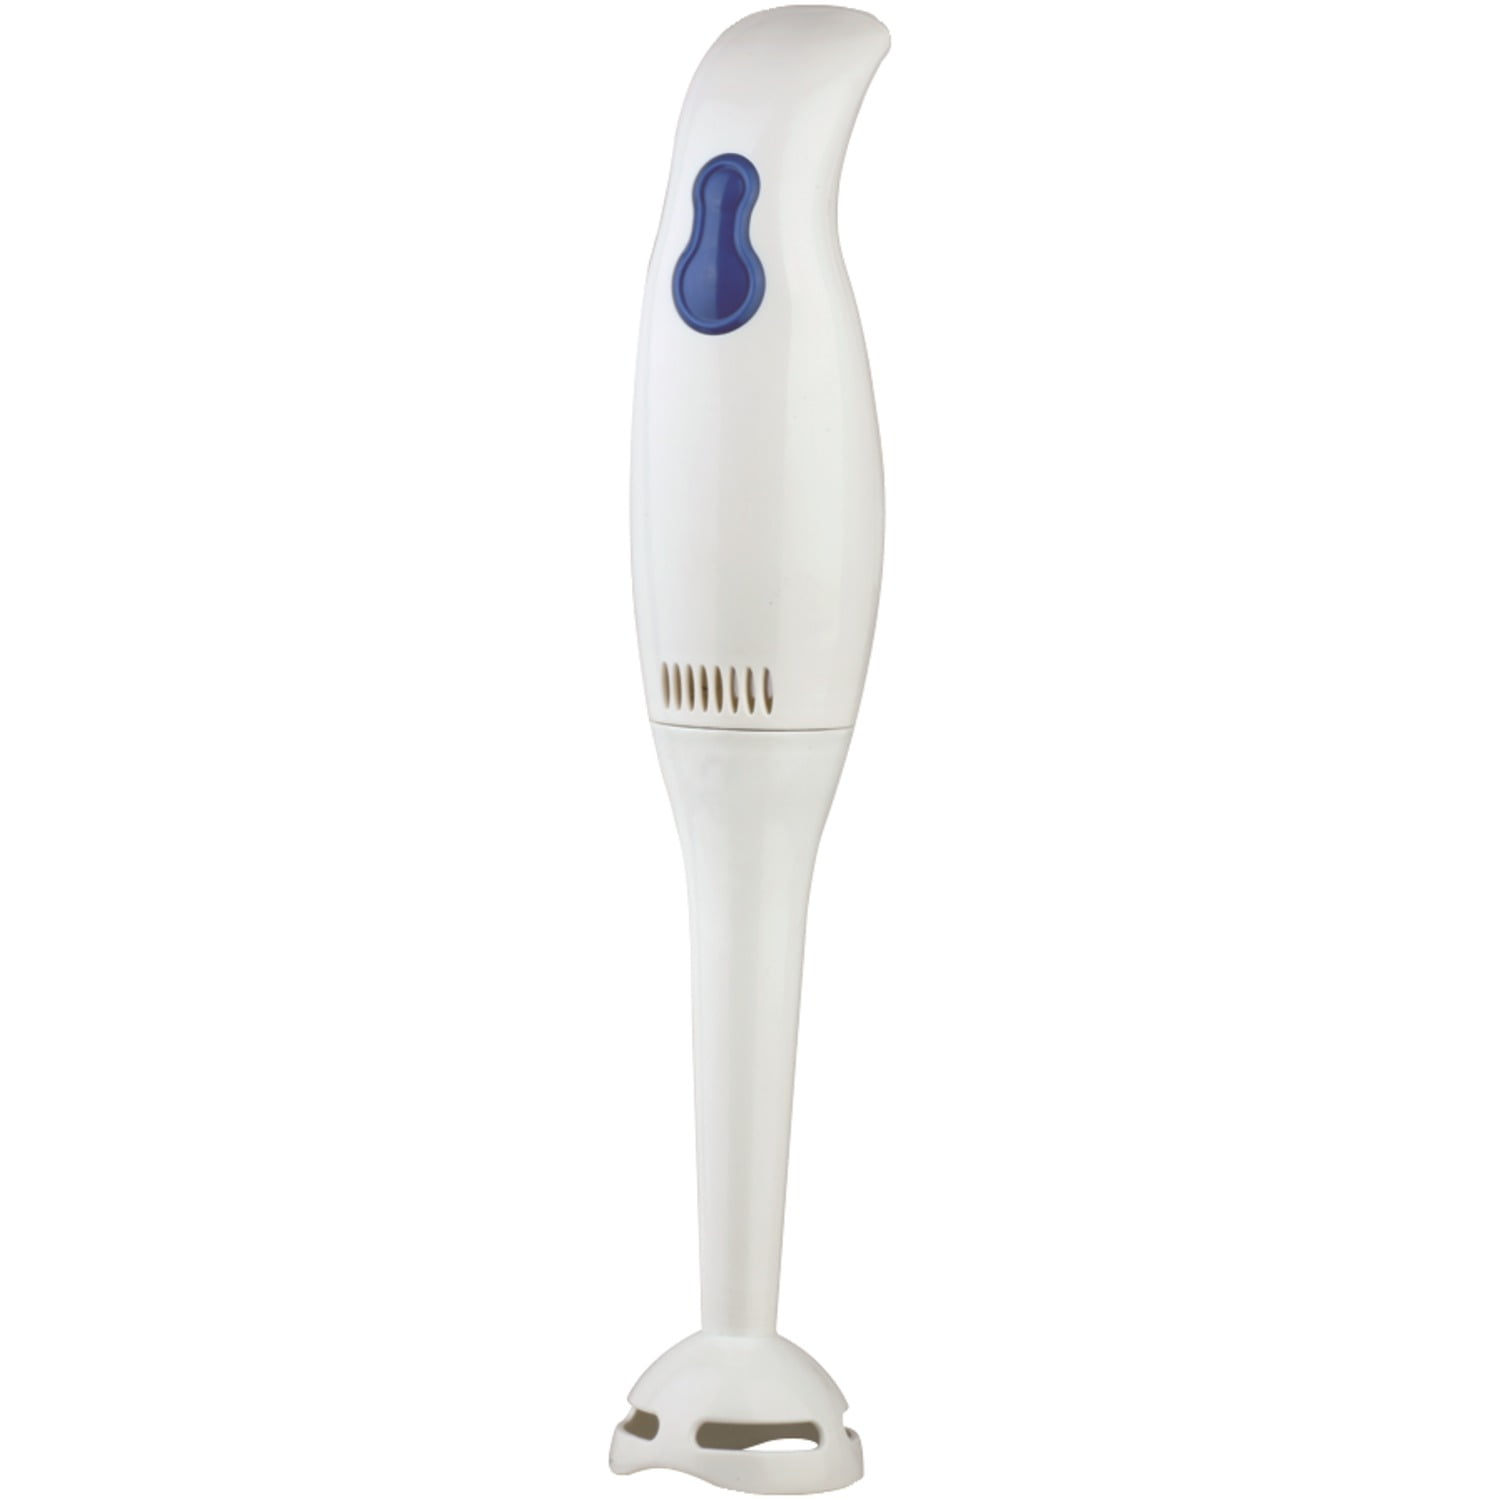 Dominion Electric 2-Speed Hand Immersion Blender White 180 Watts